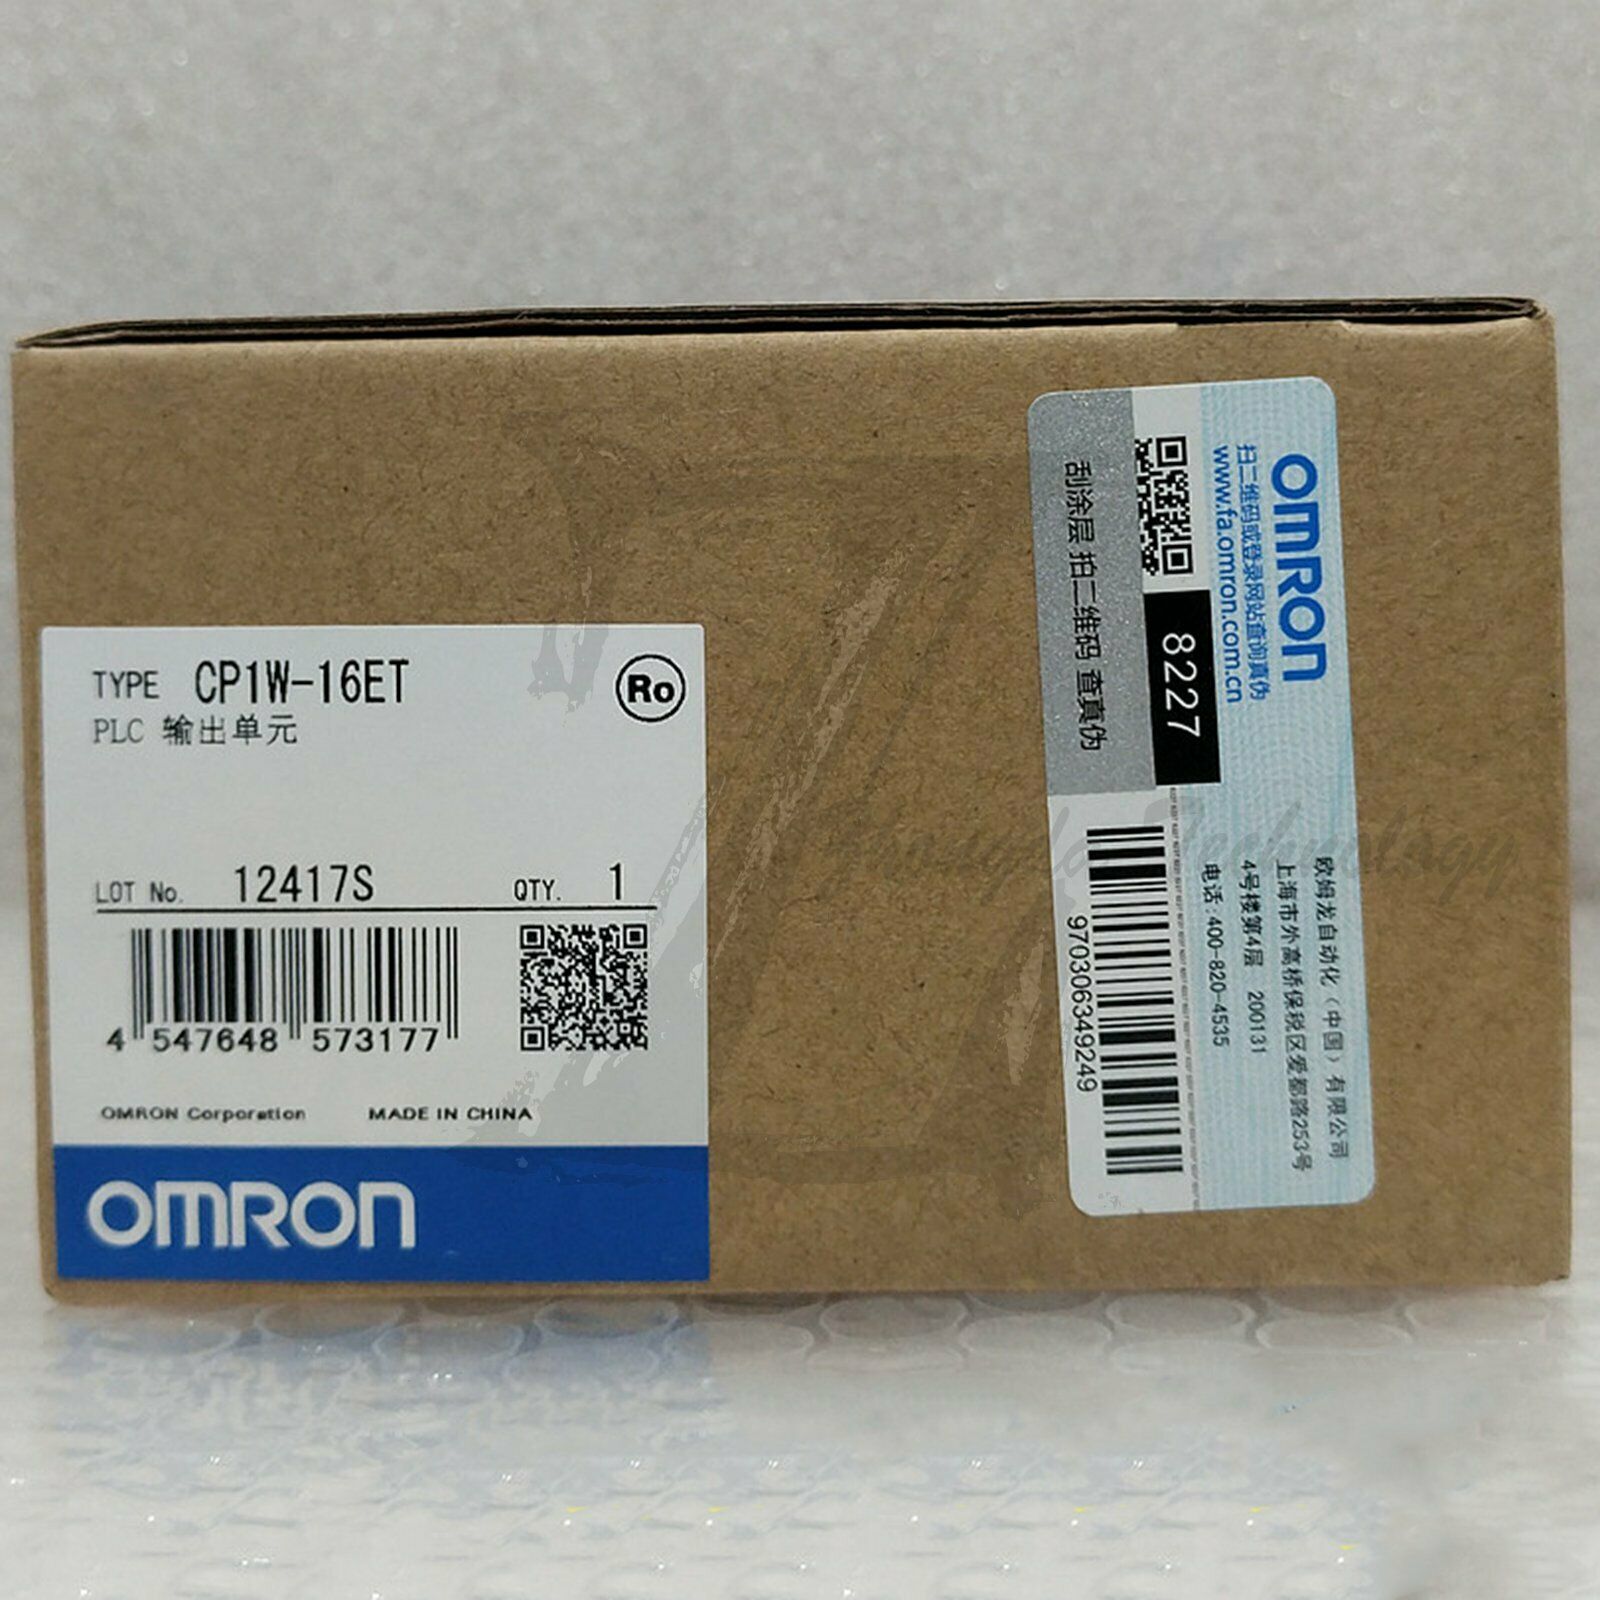 1Pc new Omron PLC expansion module CP1W-16ET one year warranty KOEED 101-200, 90%, import_2020_10_10_031751, Omron, Other